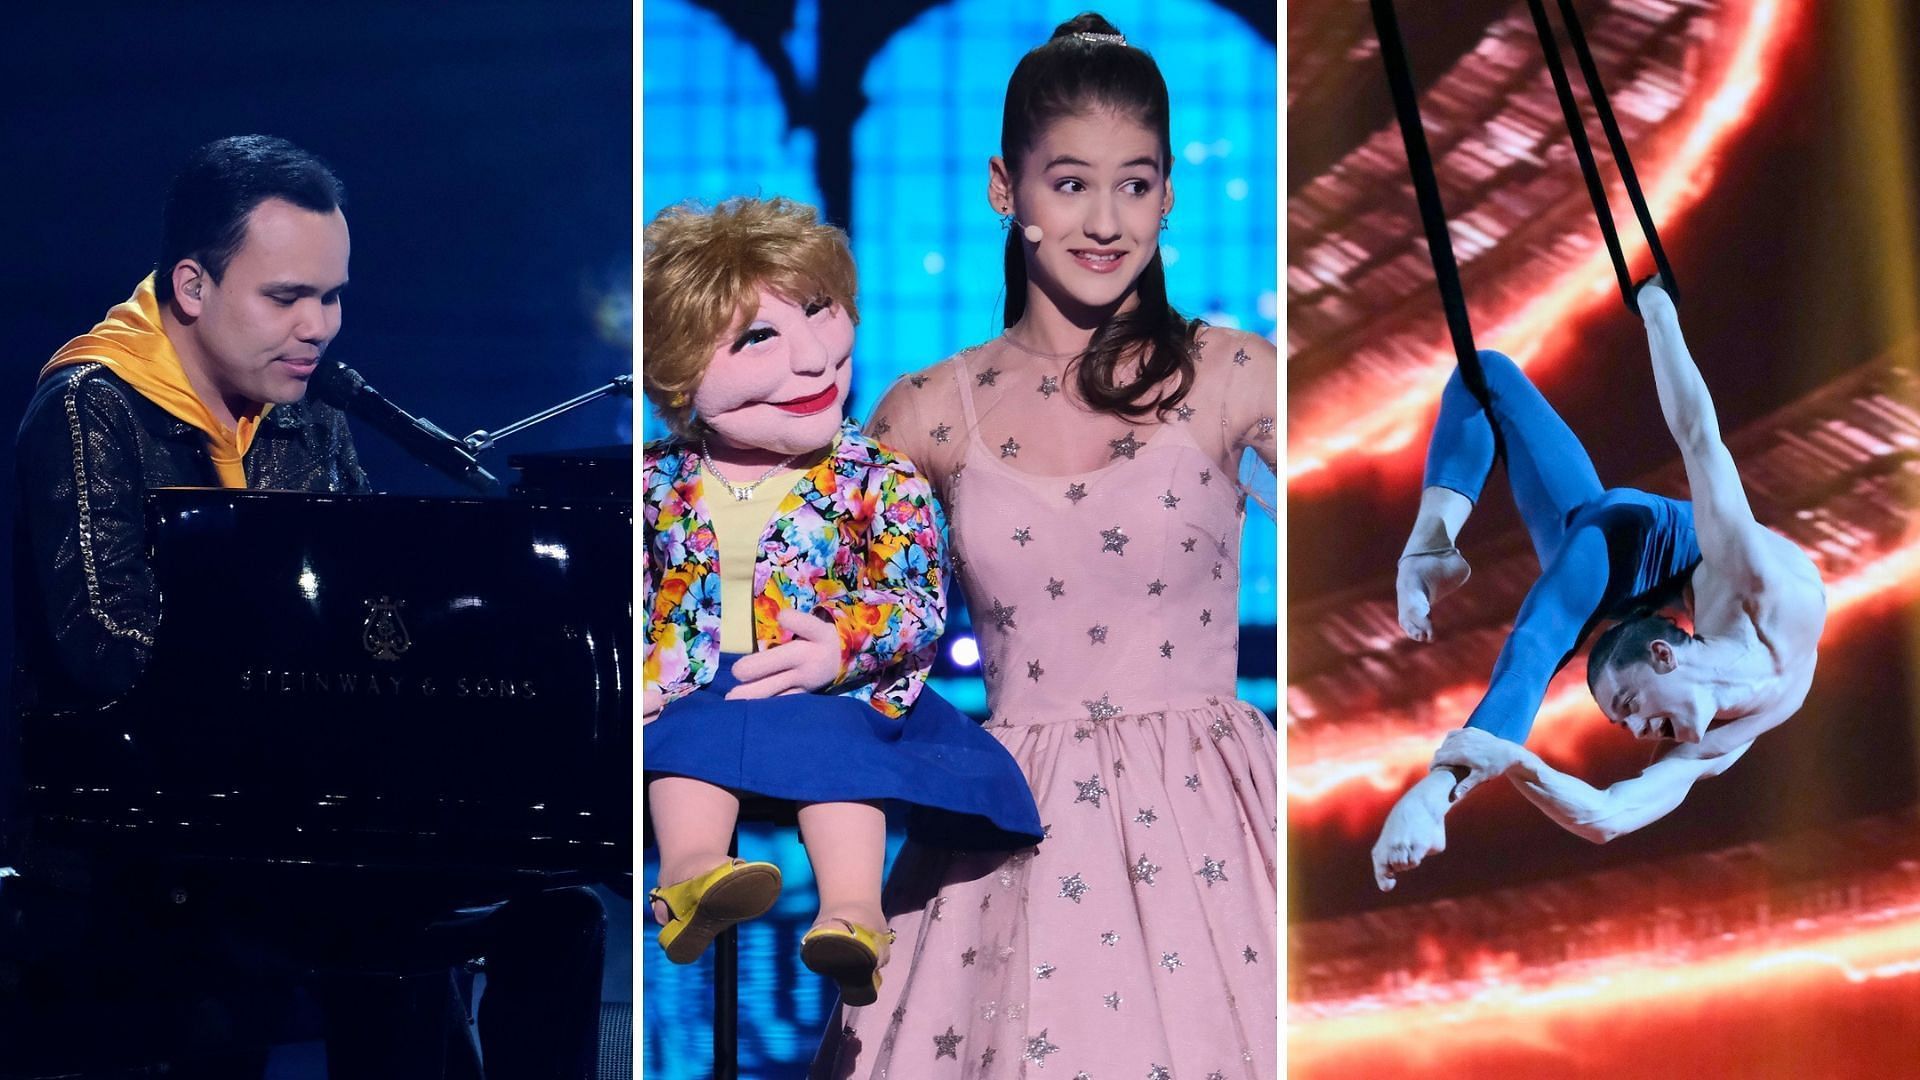 AGT: All-Stars will air its season finale episode this Monday